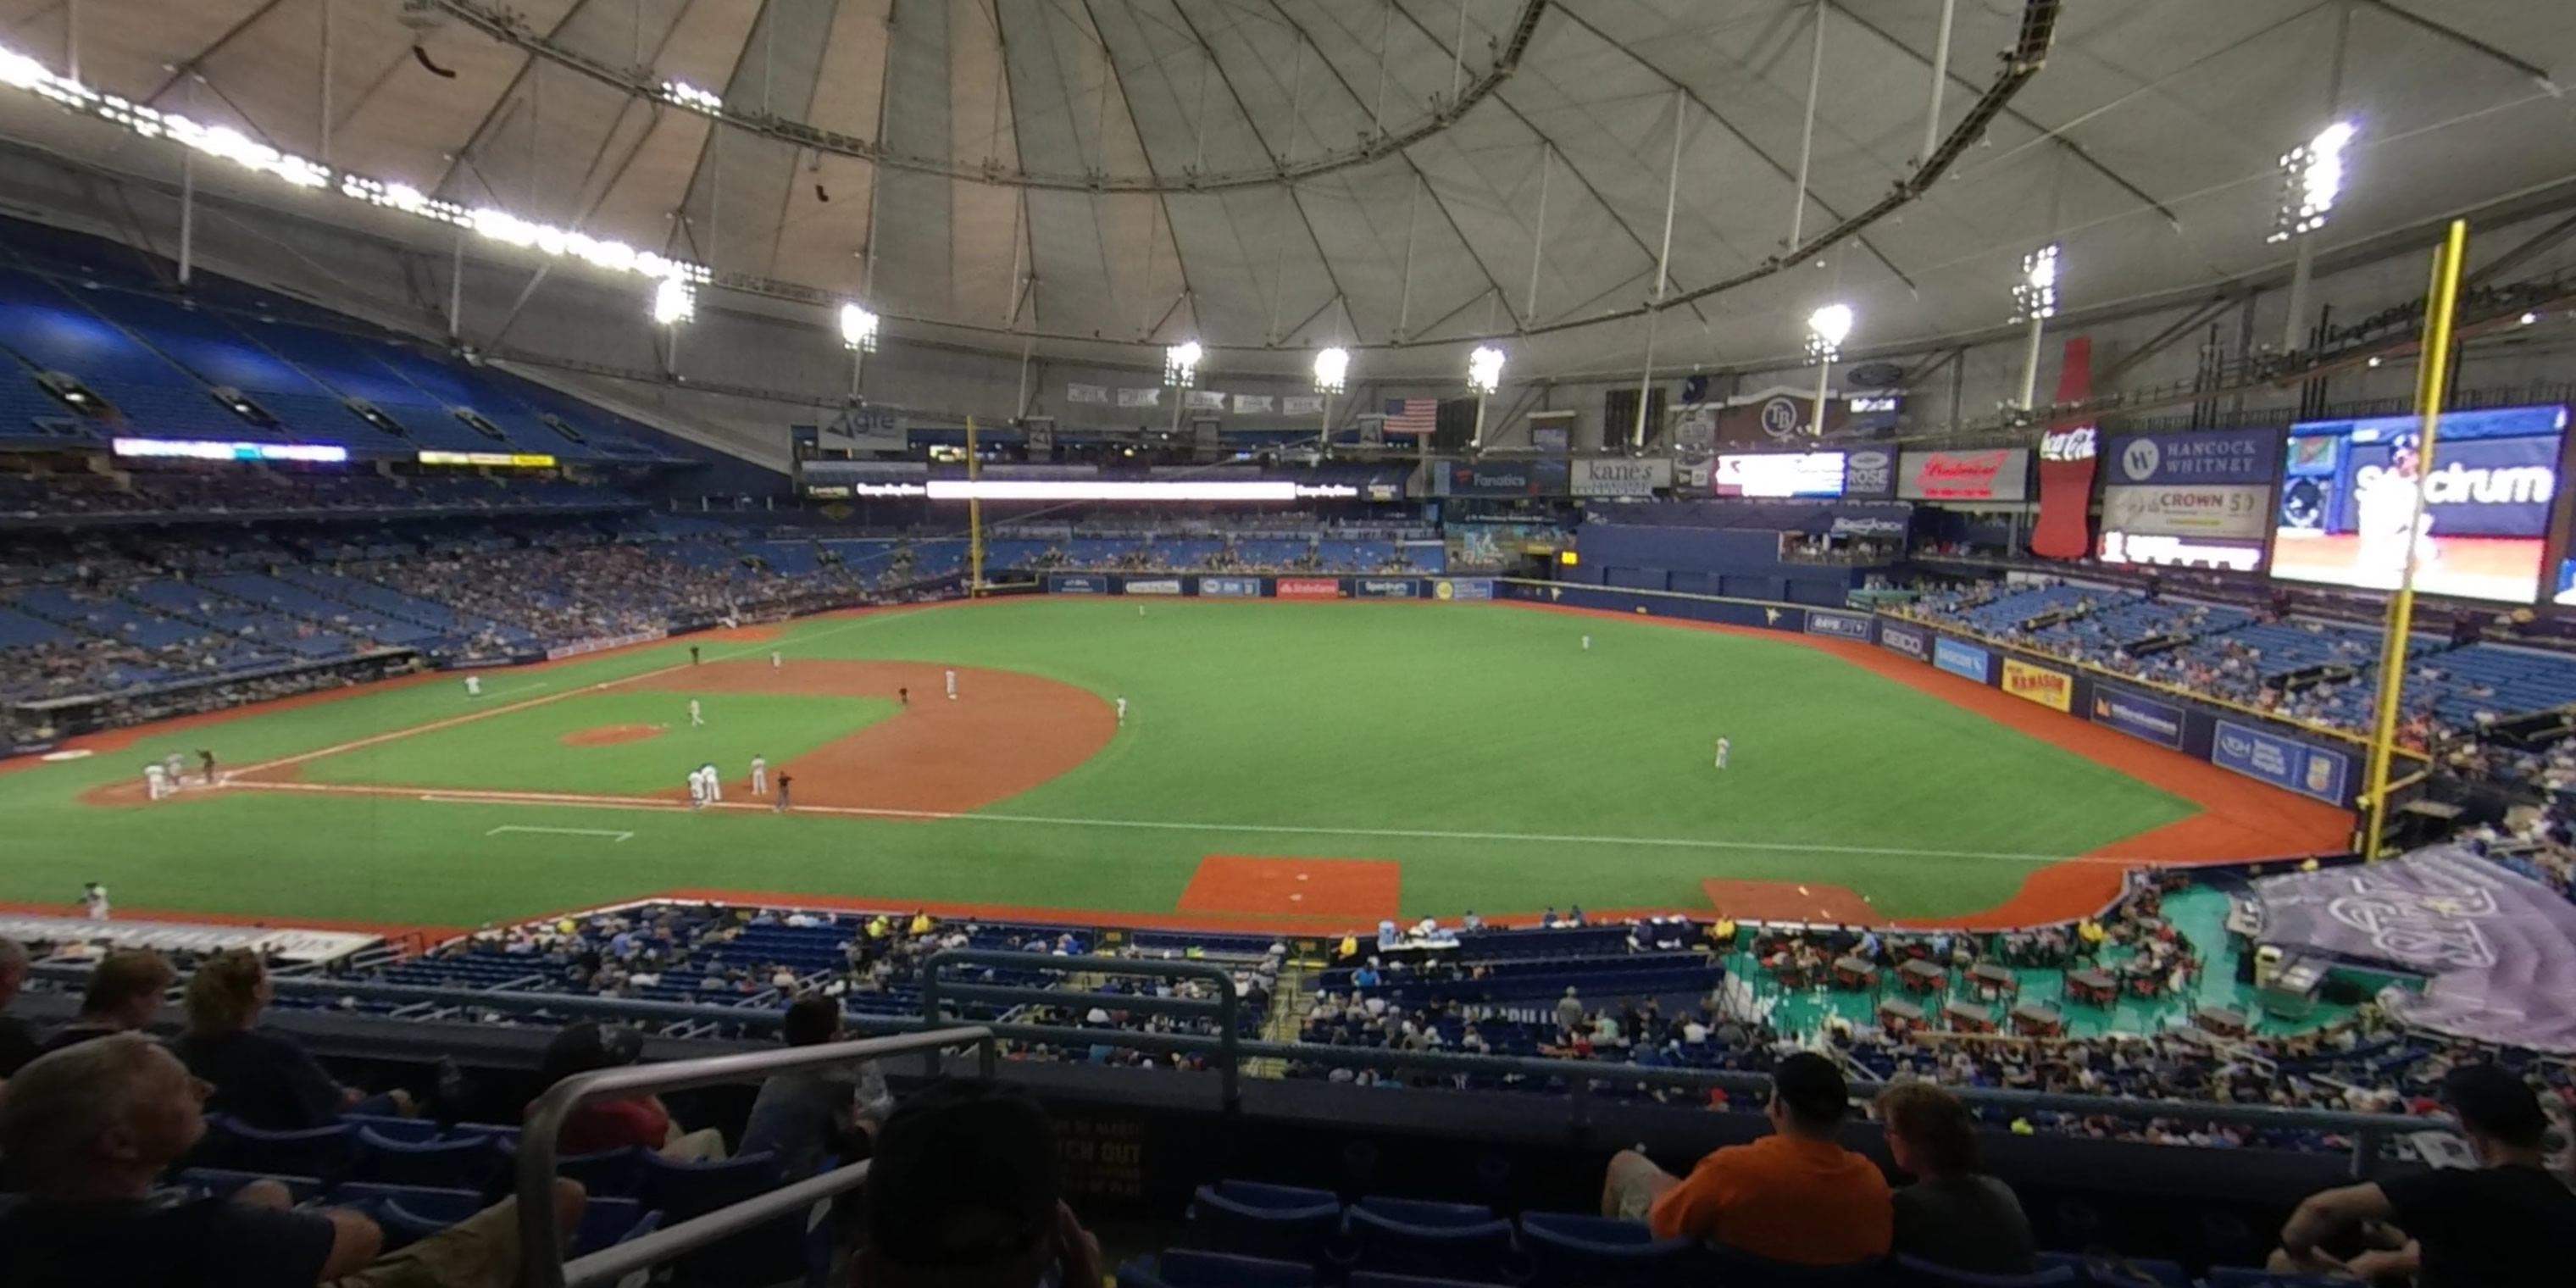 section 218 panoramic seat view  for baseball - tropicana field